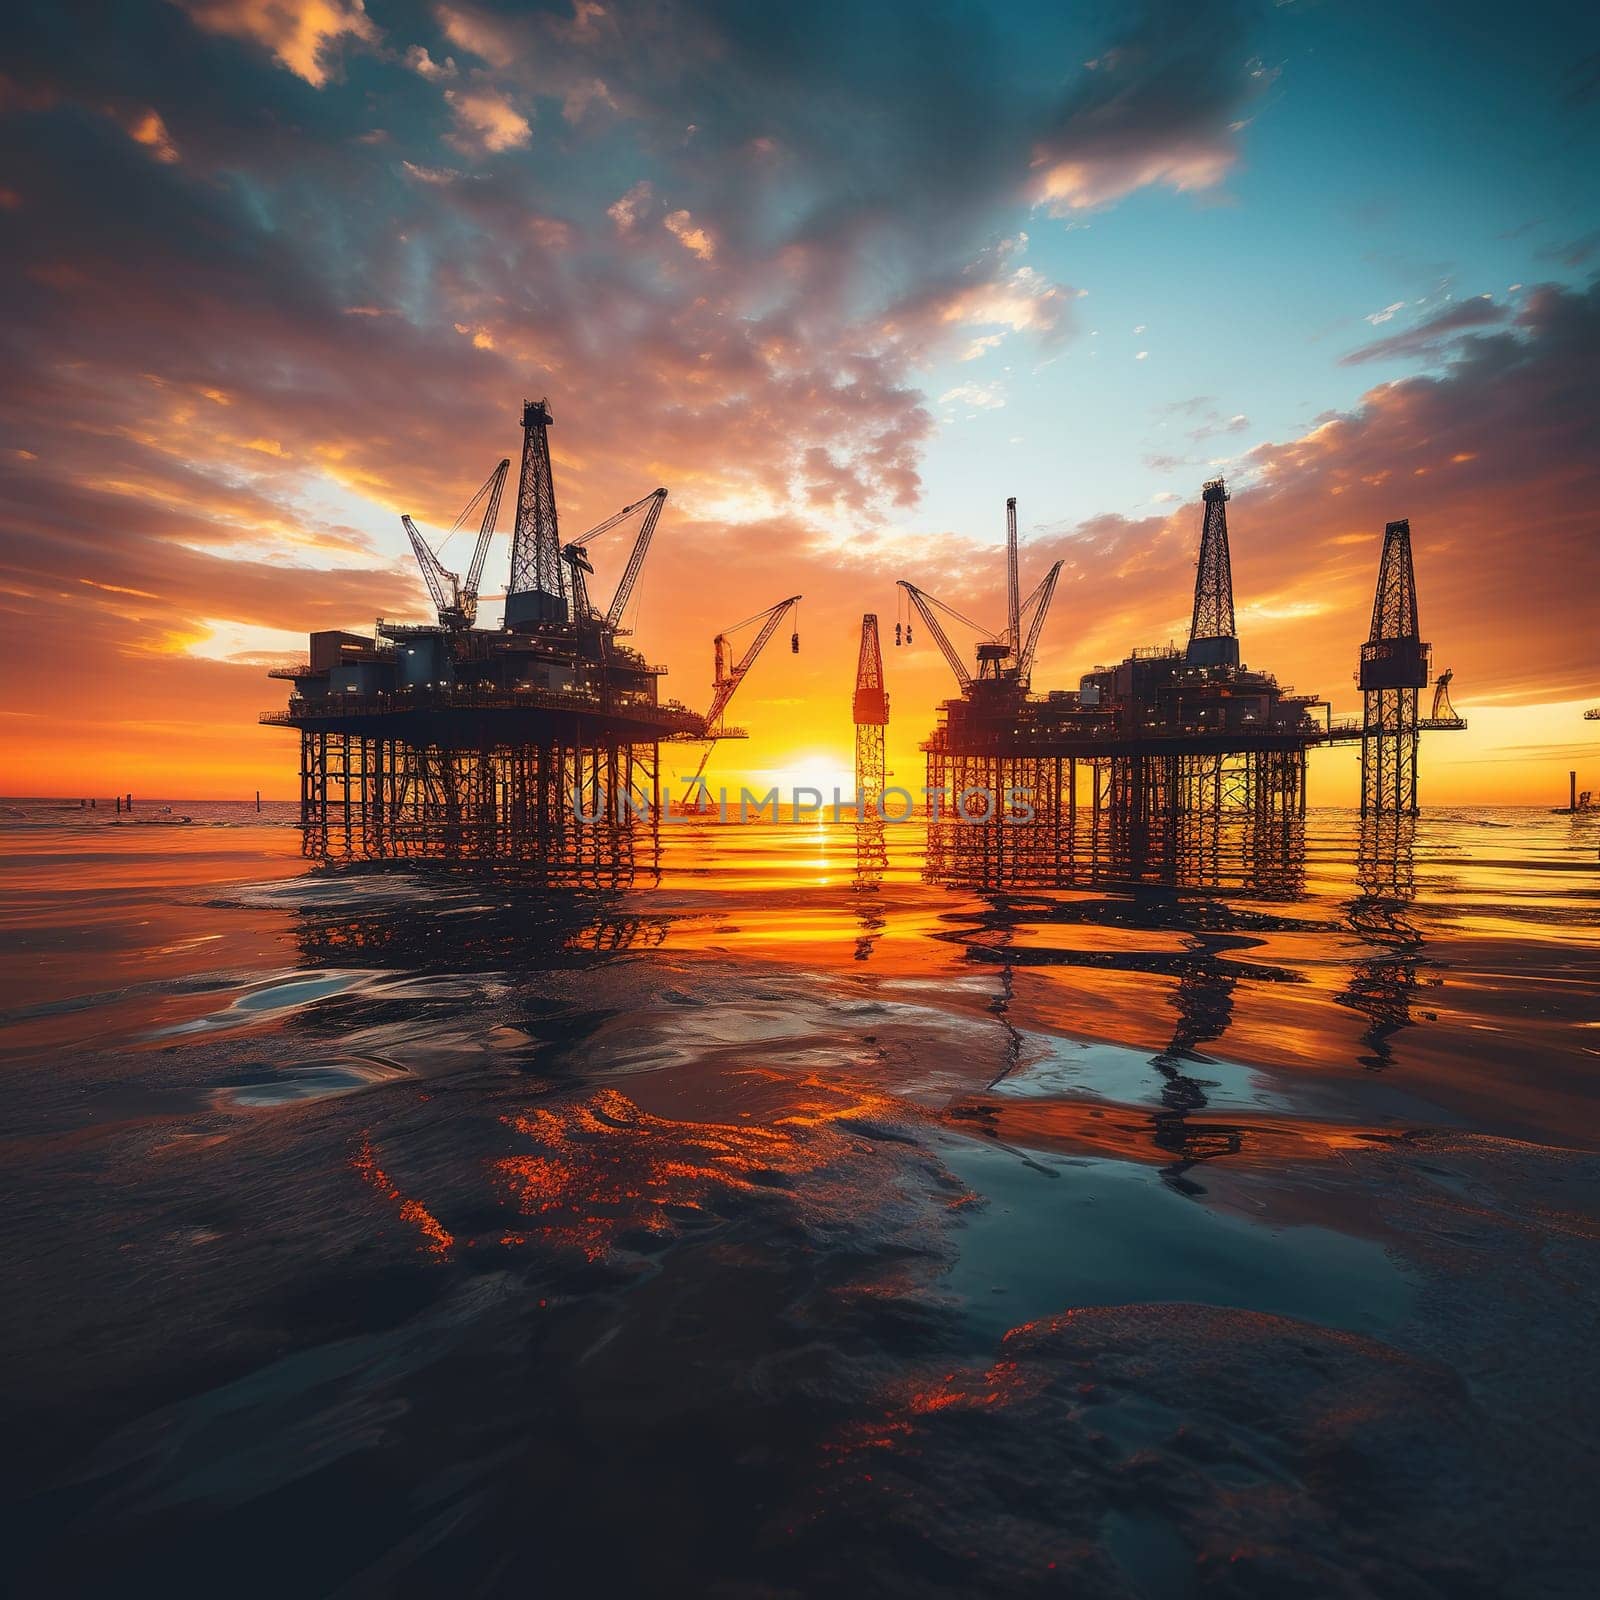 An oil platforms in the ocean, oil drilling from the bottom of the ocean, industrial concept